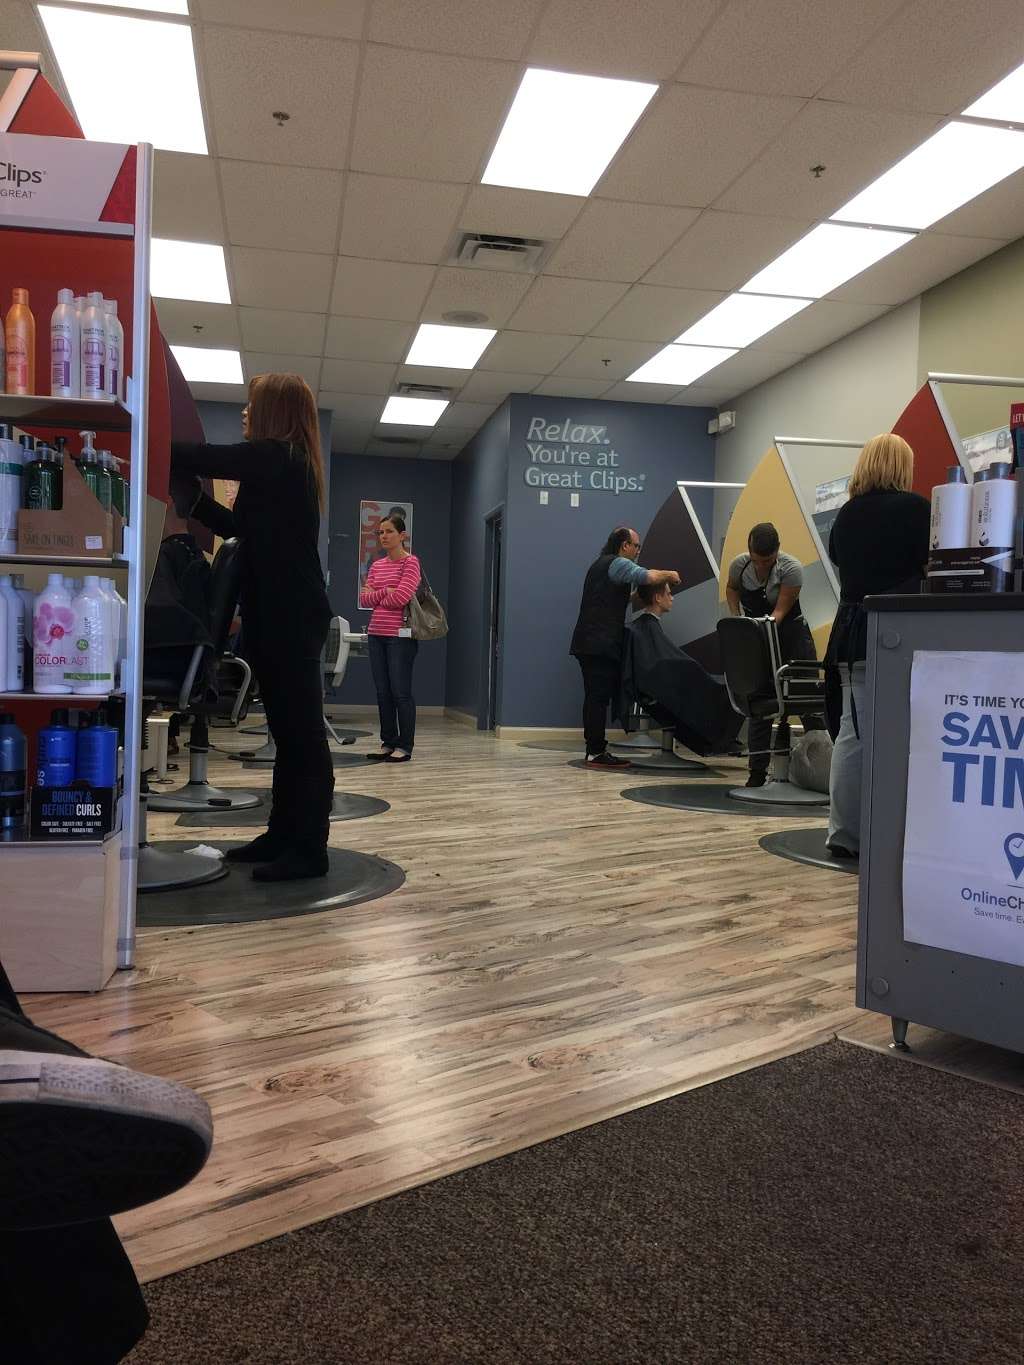 Great Clips | 9620 Westview Dr Ste 200, Coral Springs, FL 33076 | Phone: (954) 753-4787